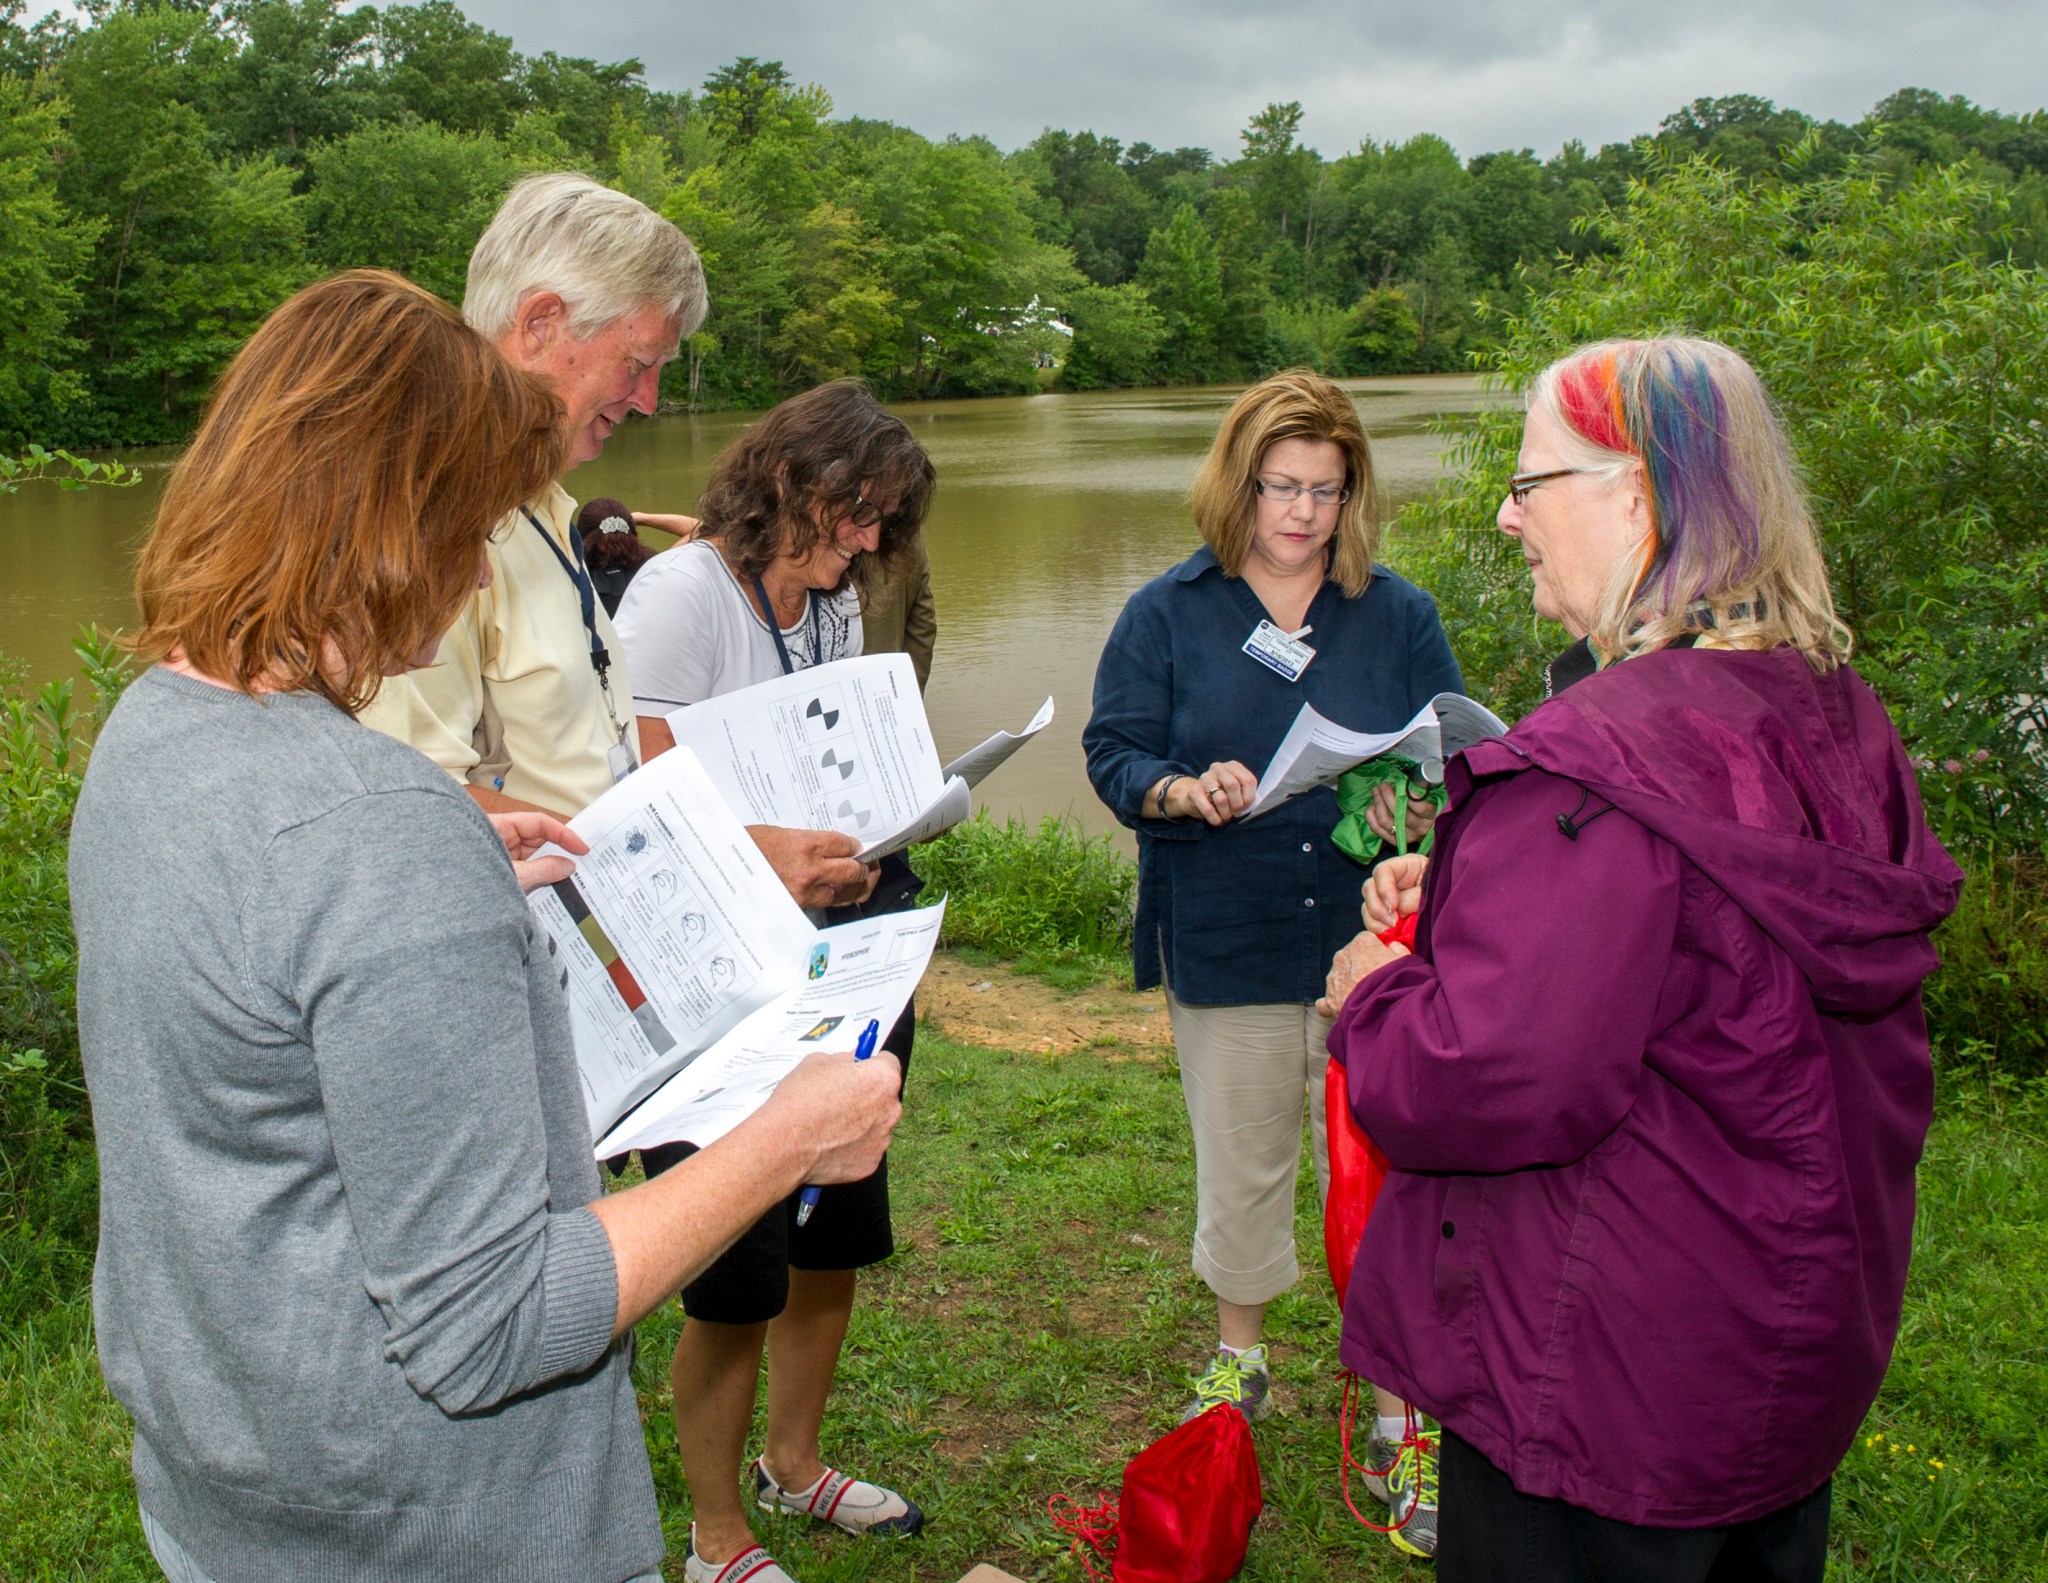 Several teachers read pamphlets in front of a body of water